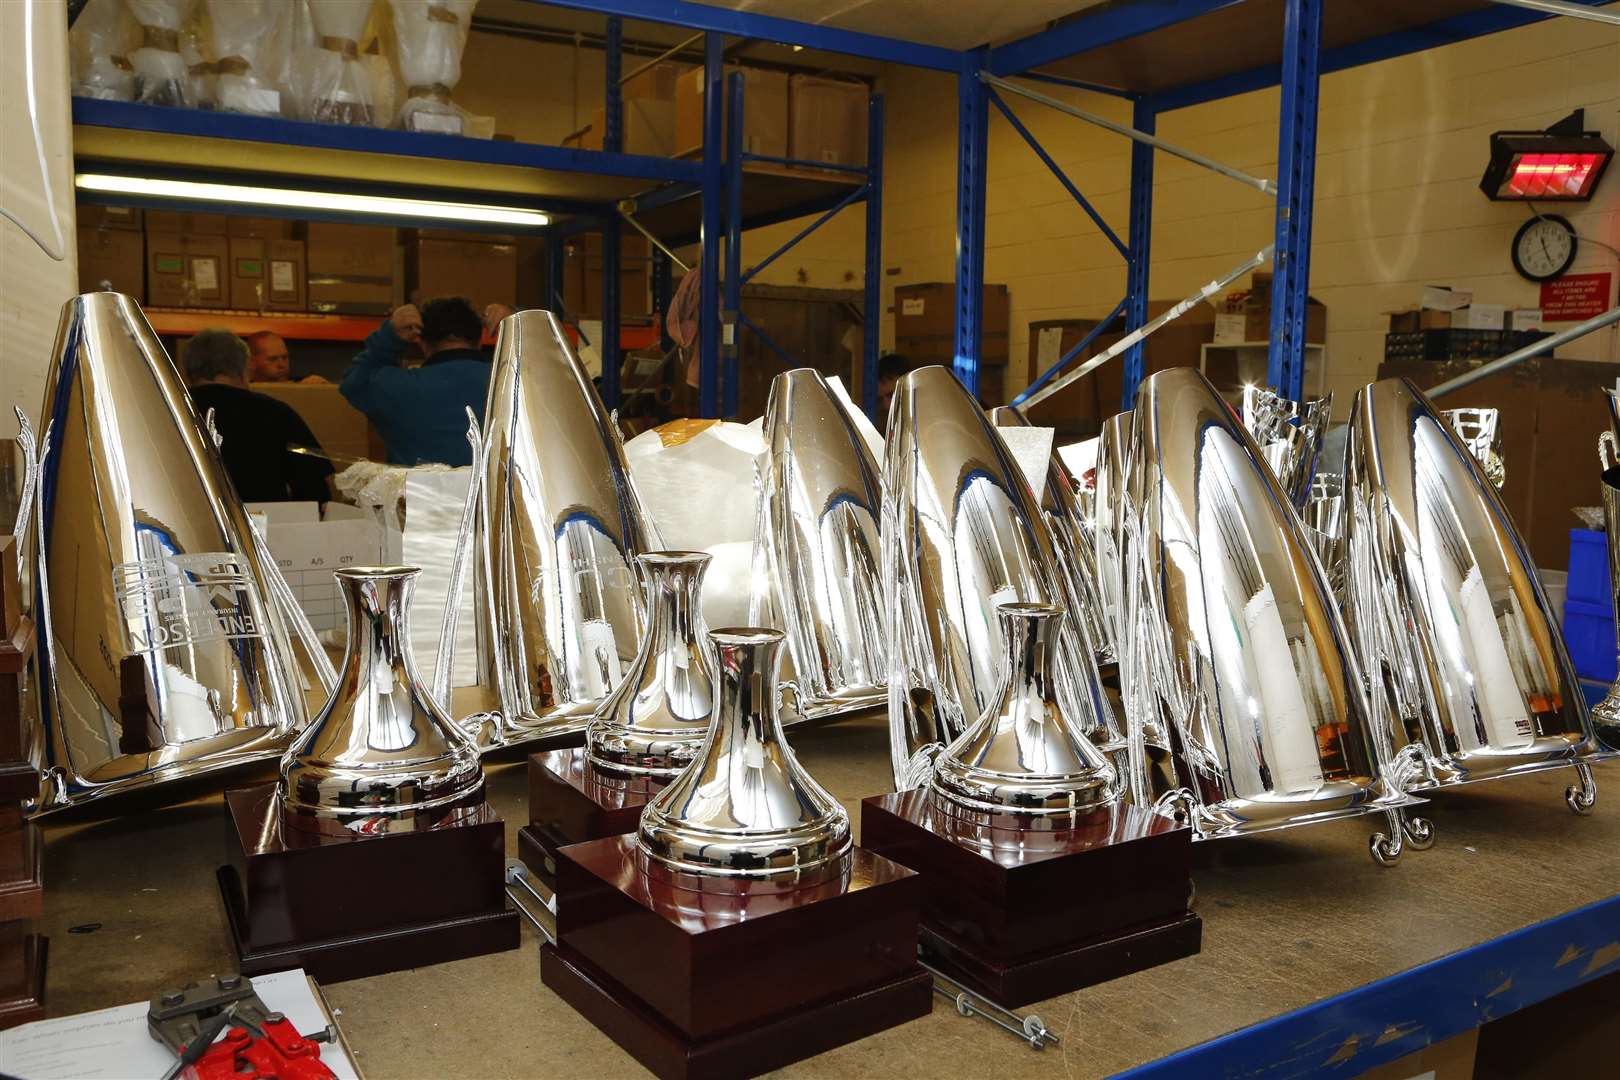 British Formula 1 Grand Prix trophies created by Bearsted firm